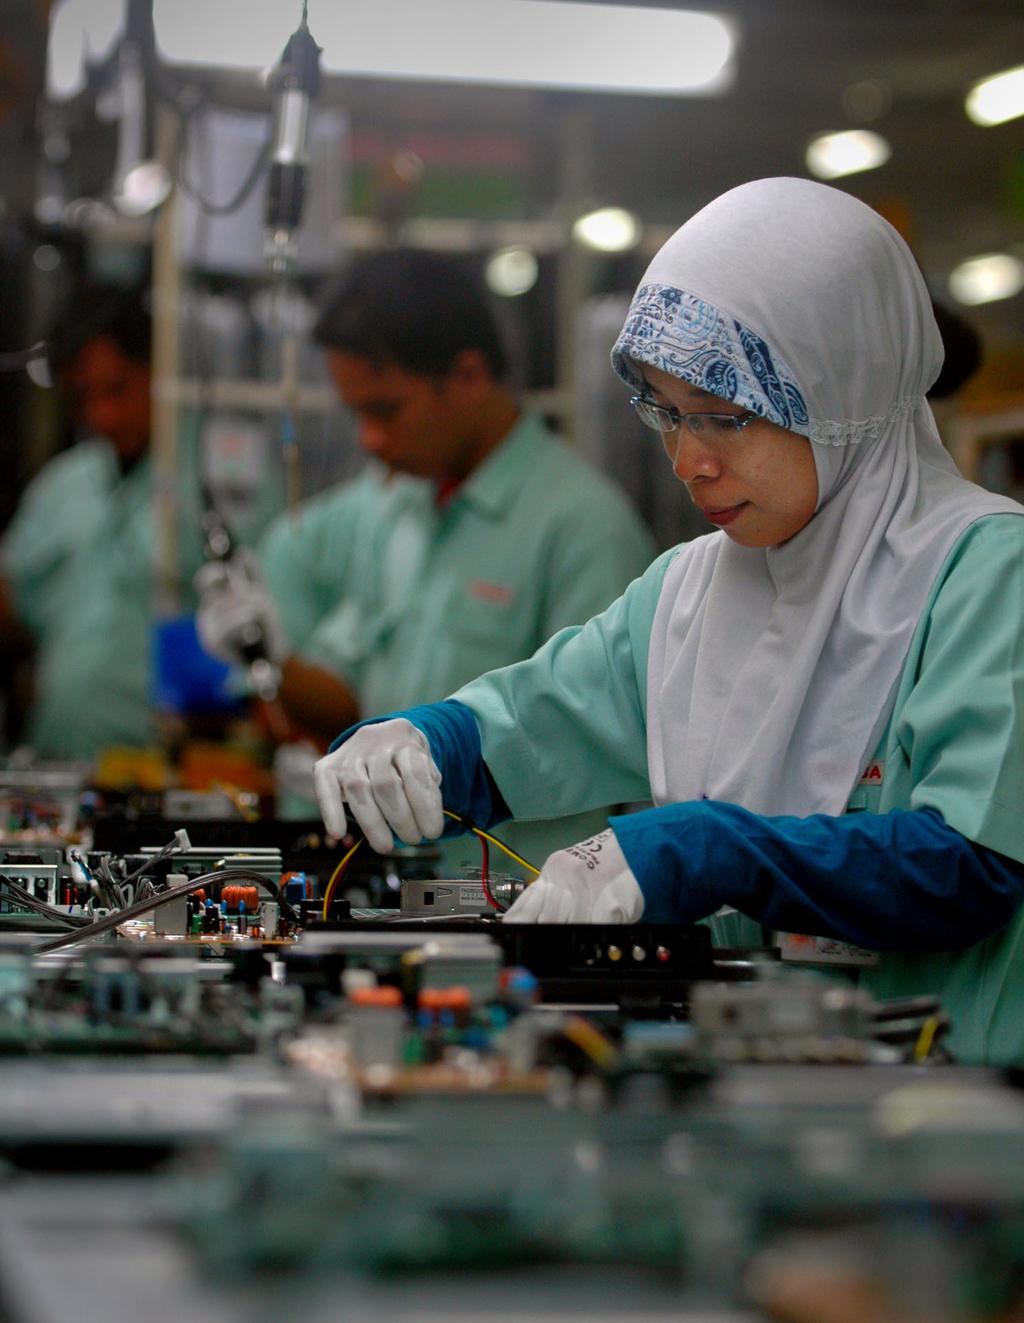 FORCED LABOR IN THE PRODUCTION OF ELECTRONIC GOODS IN